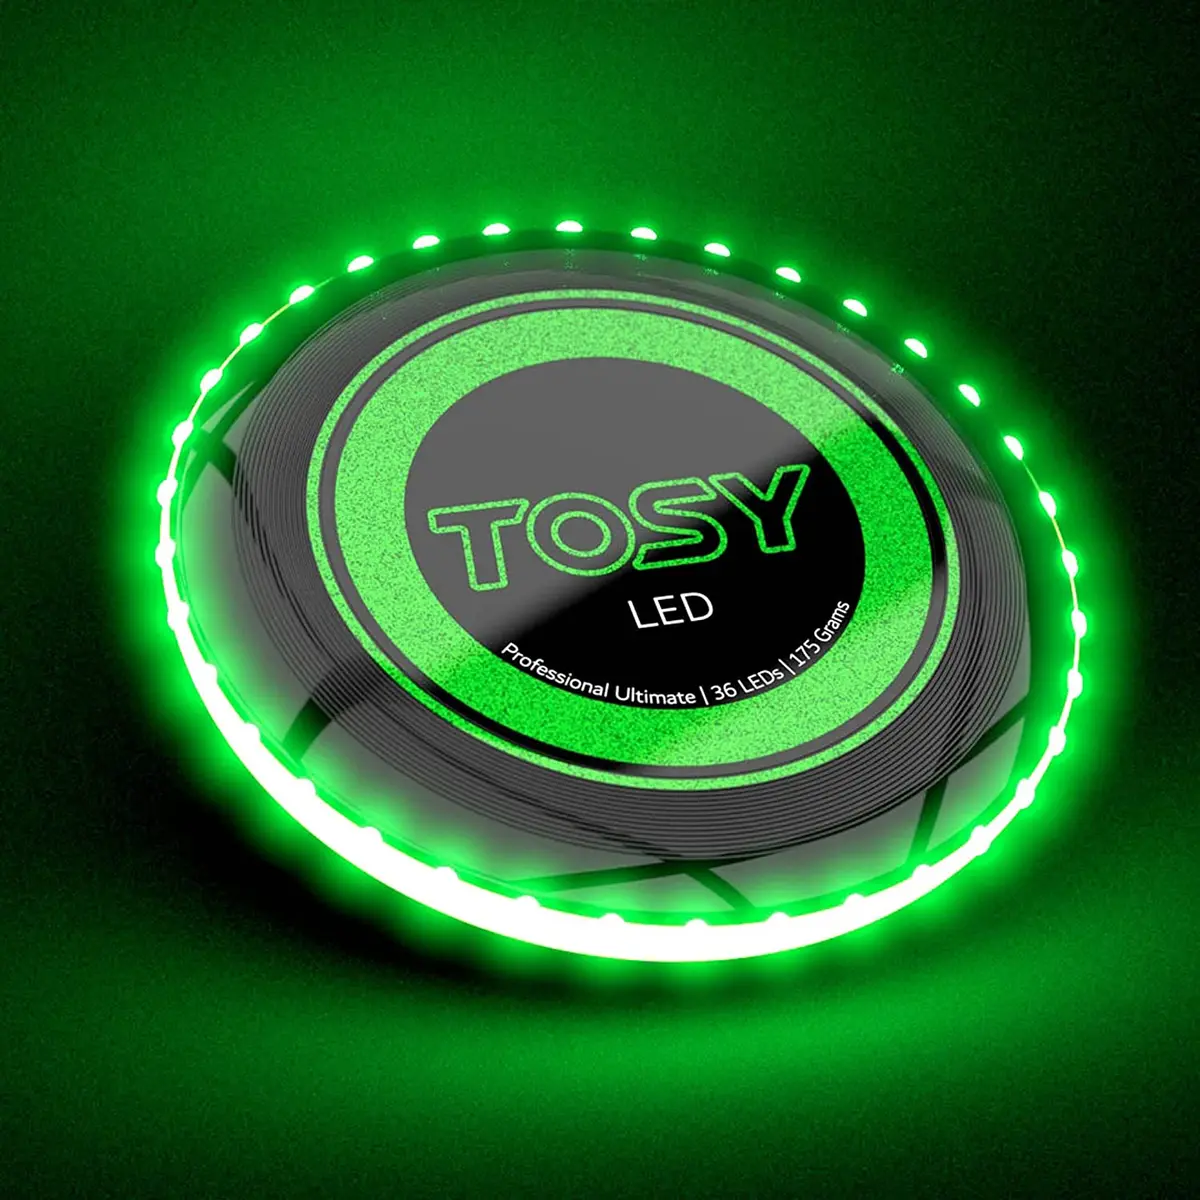 mild Avenue Nybegynder TOSY 36 and 360 Leds Frisbee - Extremely Bright Flying Disc, Smart Modes,  Glow i | eBay